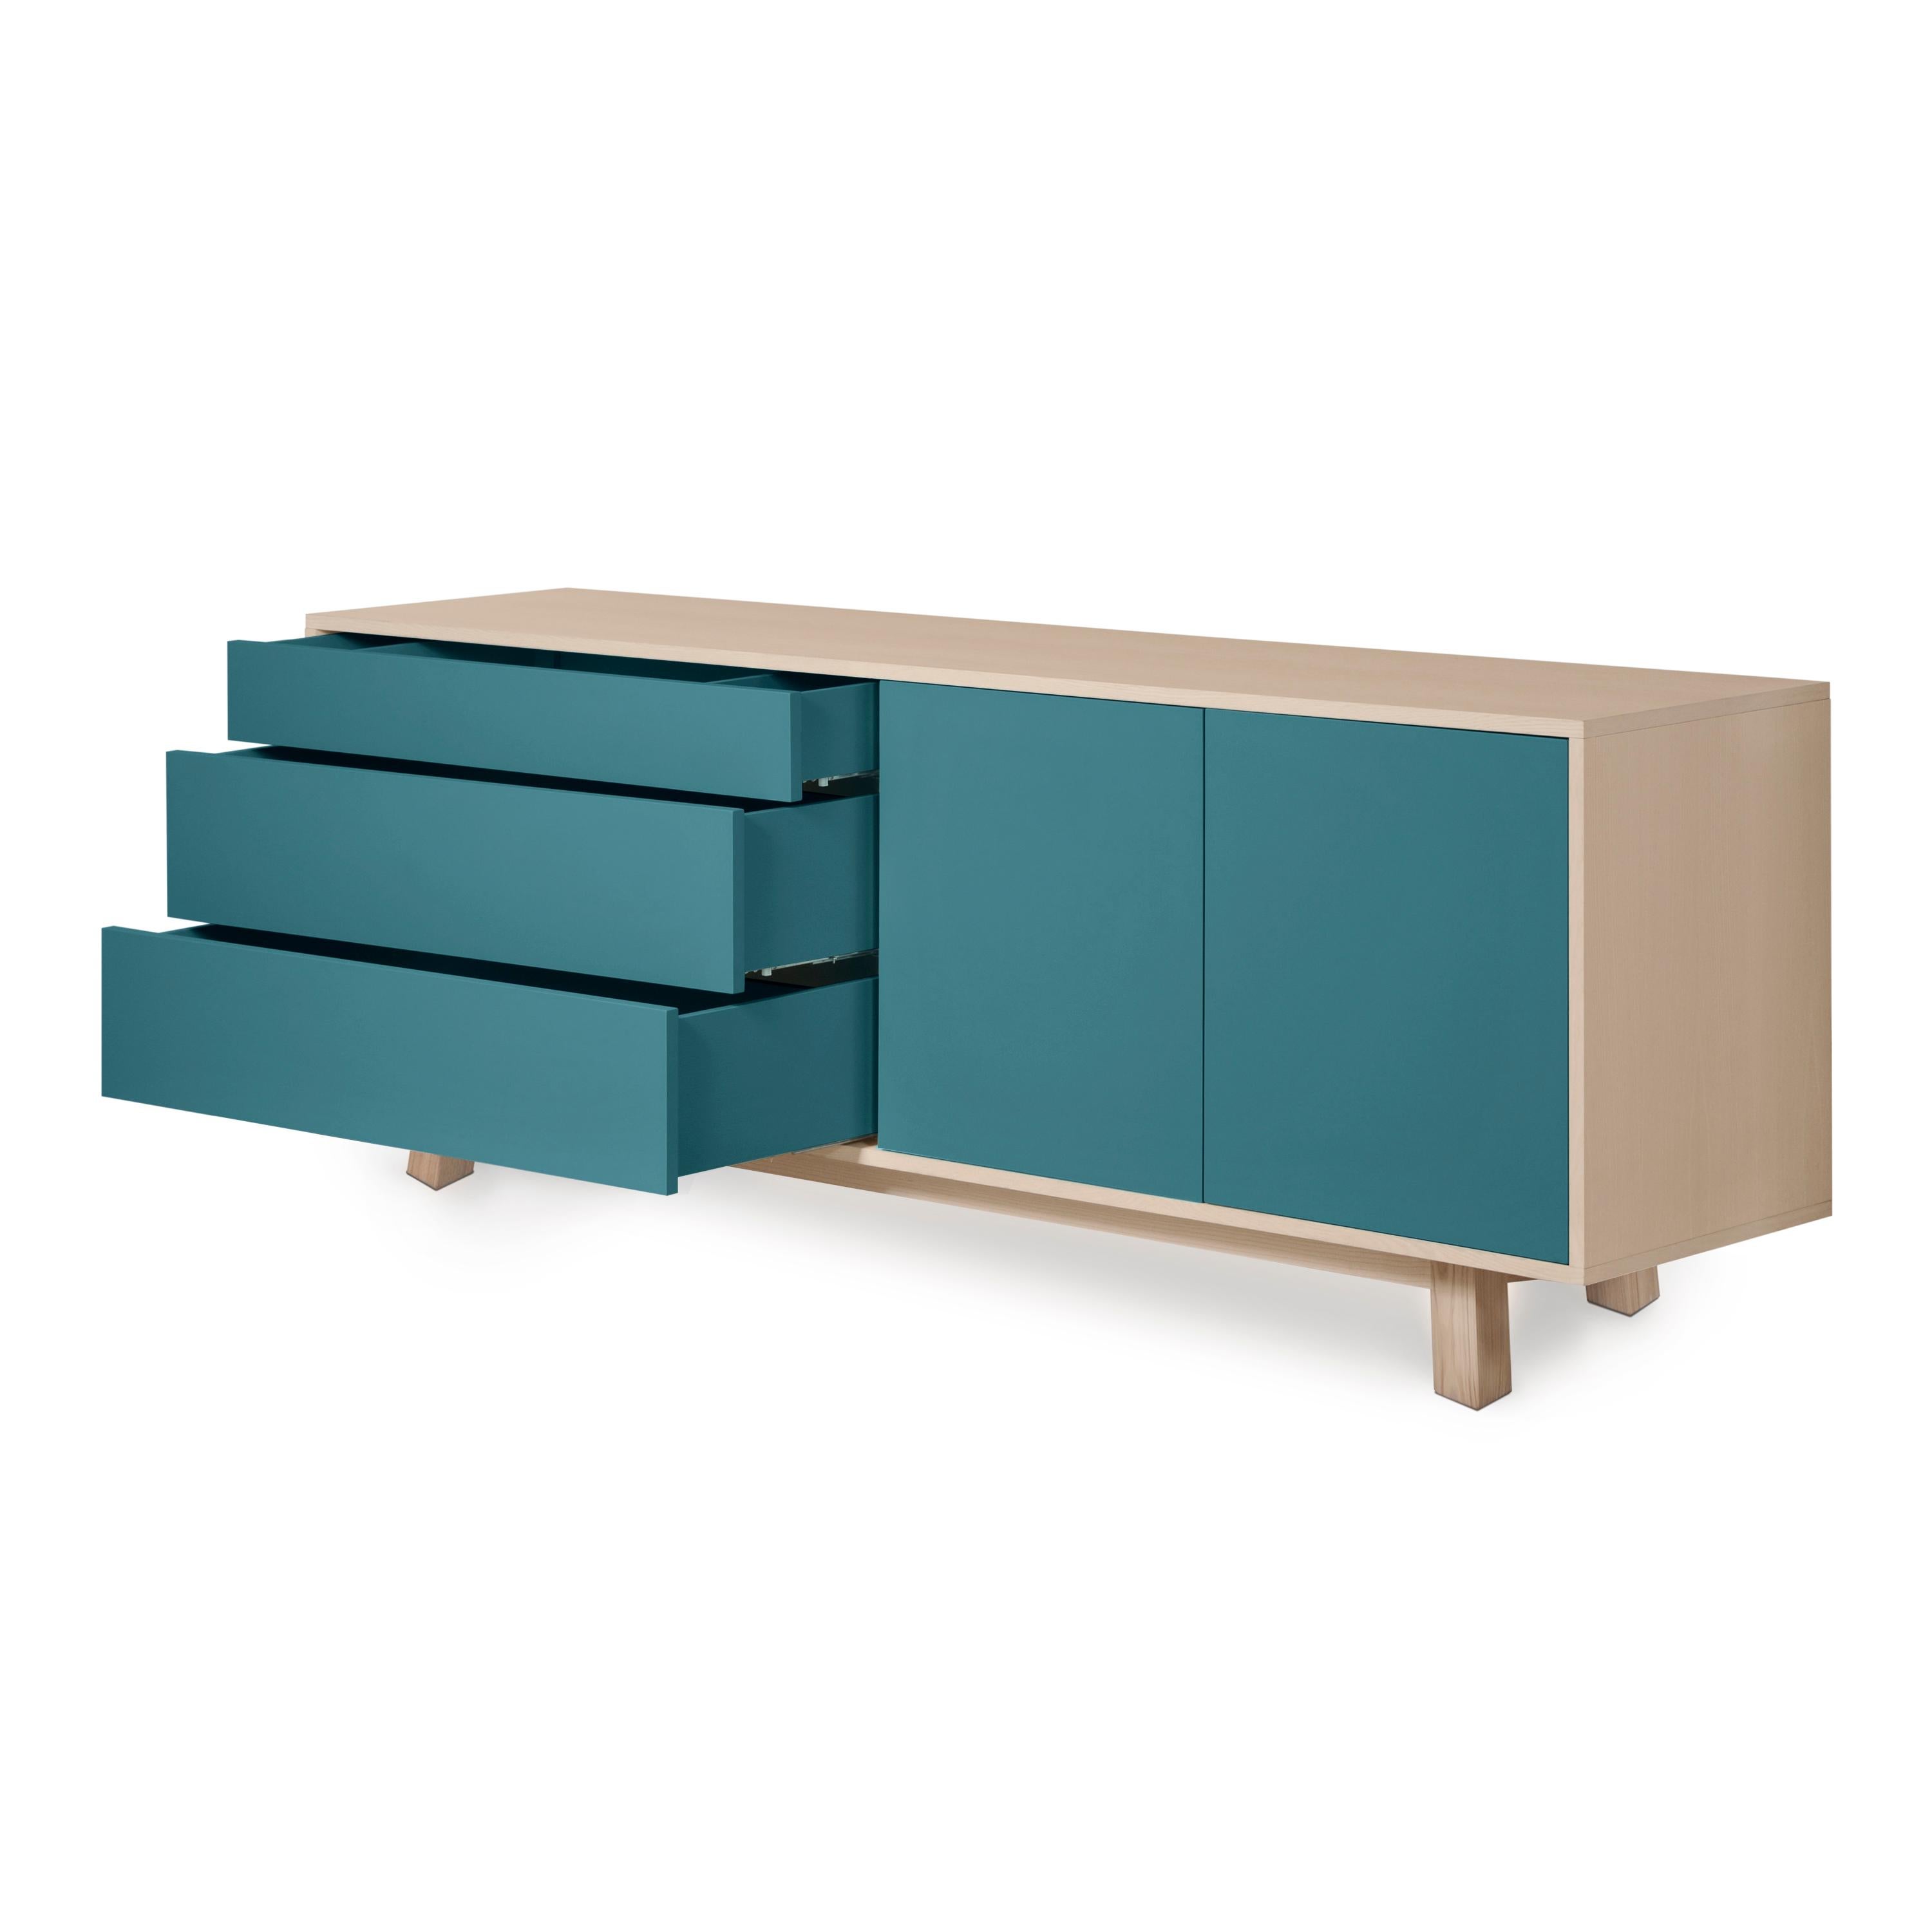 Contemporary Sea Blue Sideboard, Scandinavian Design by Eric Gizard in Paris, French Craft For Sale